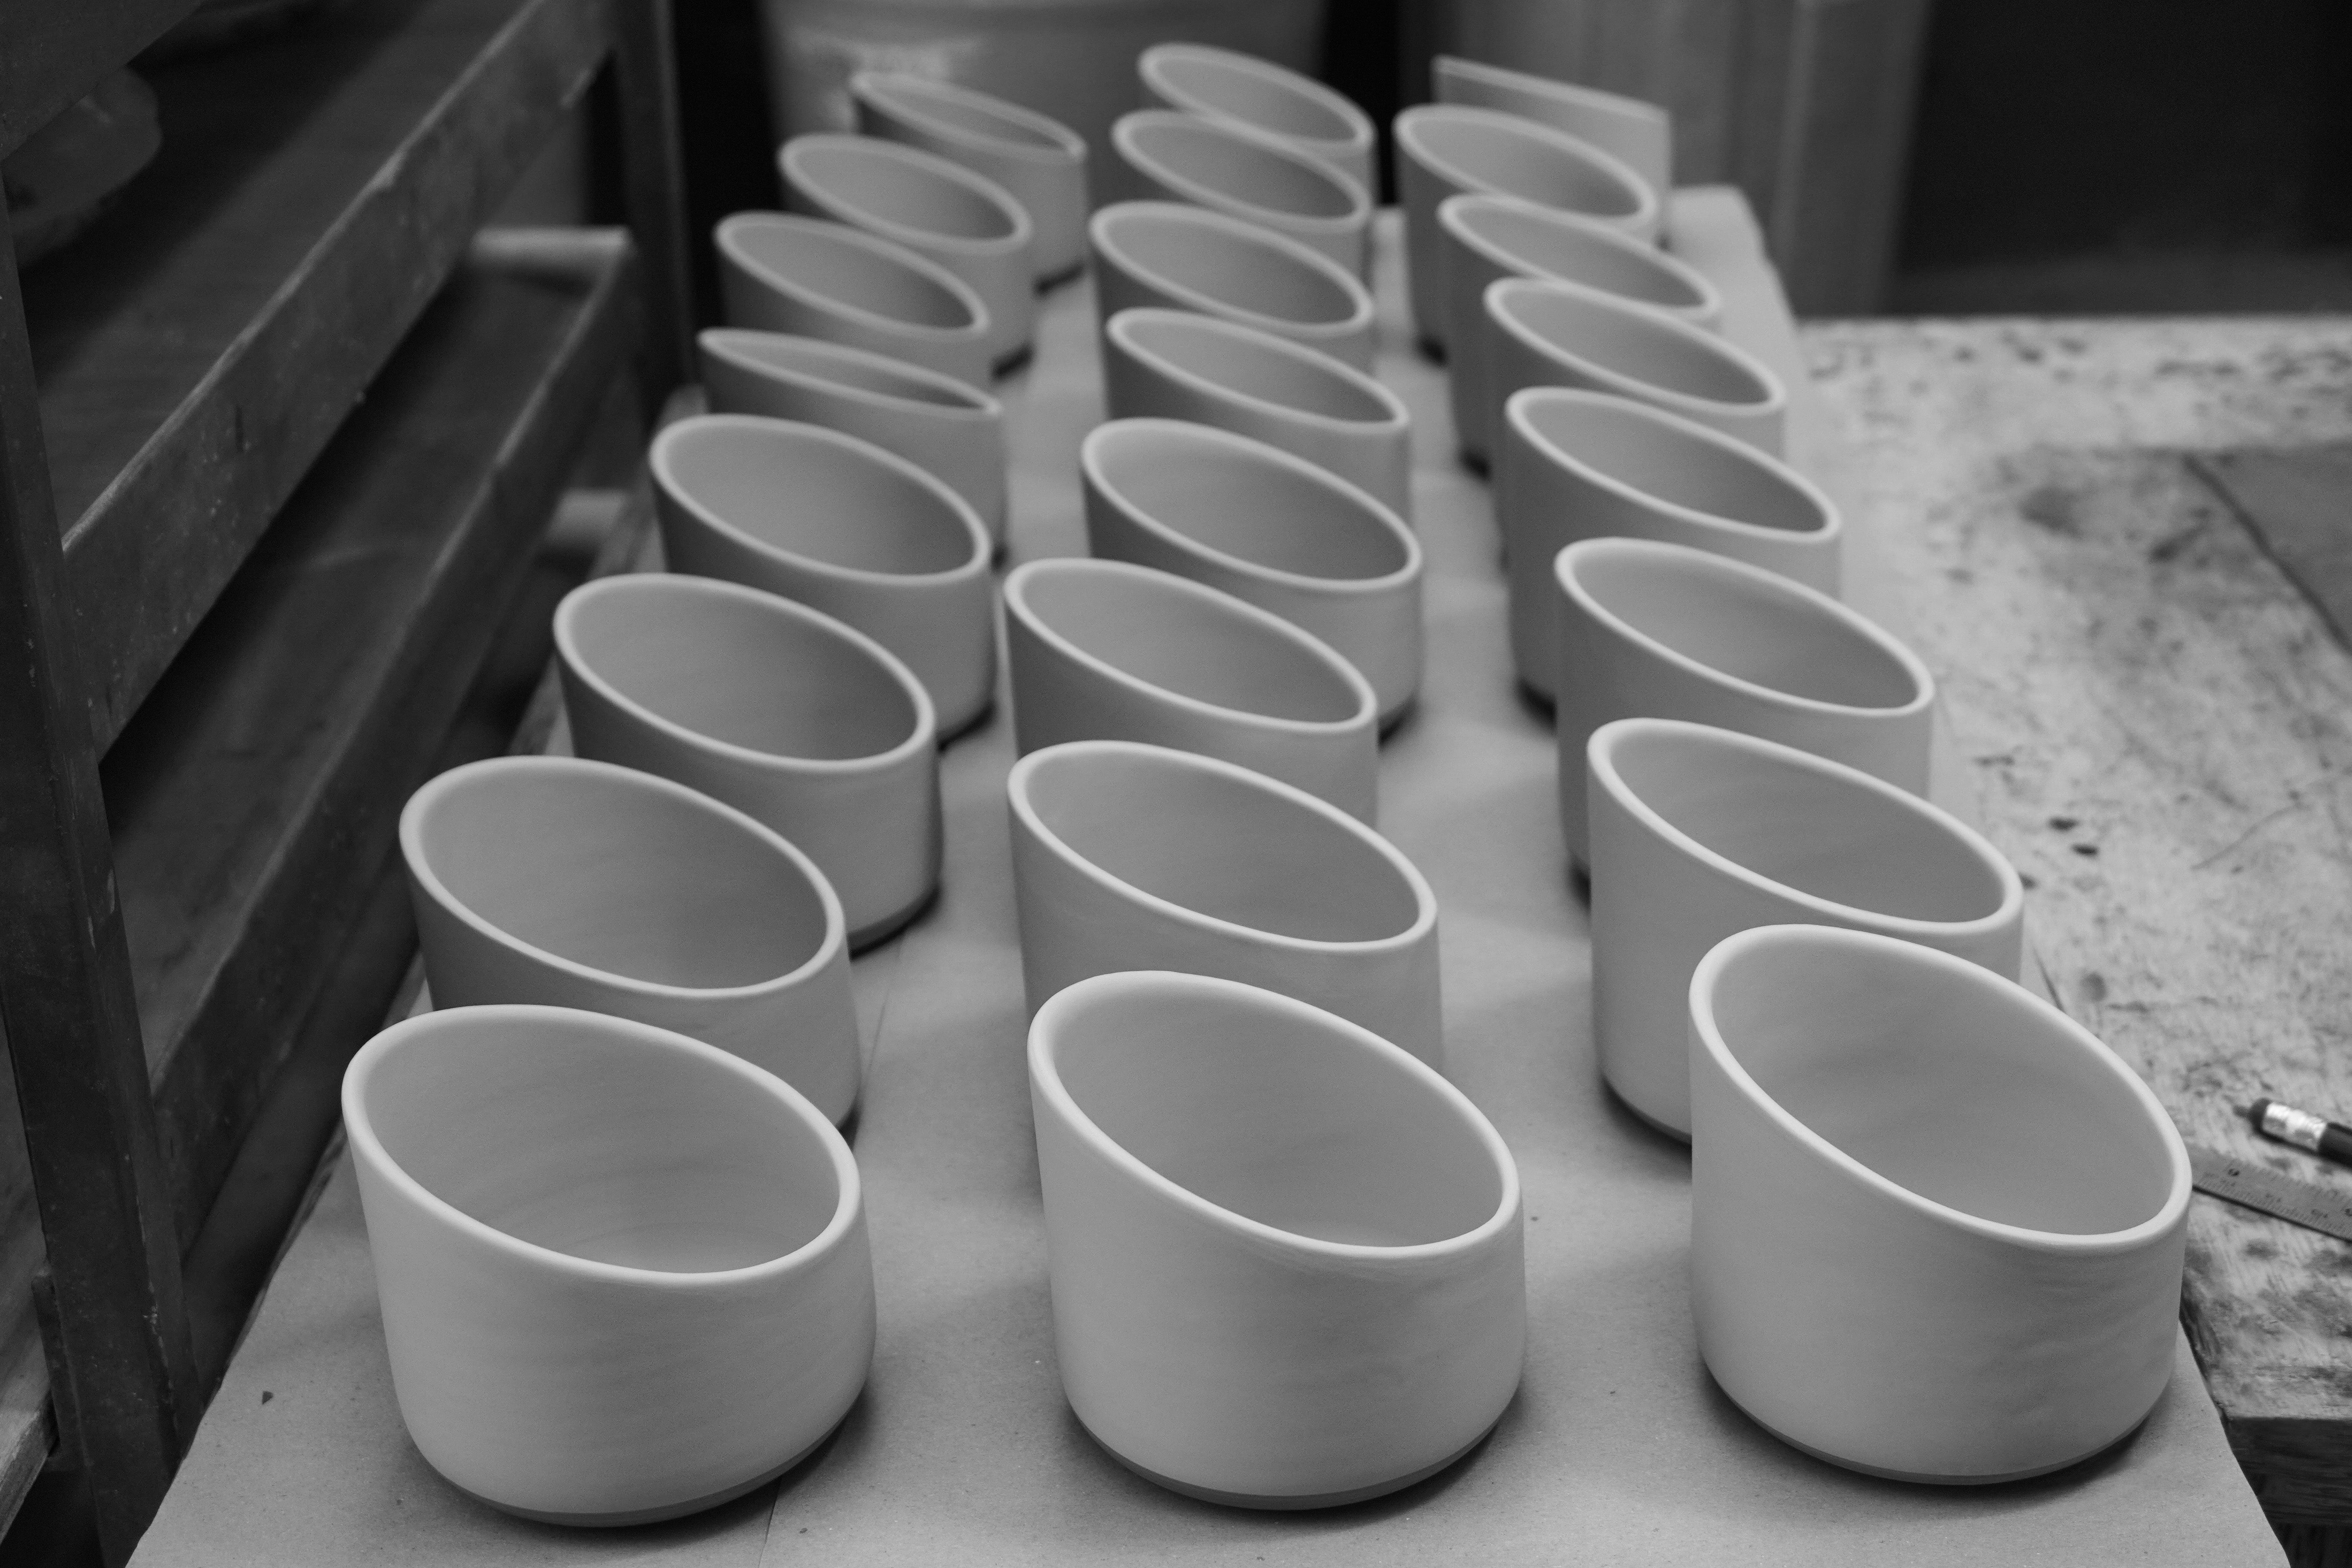 Our handmade clay ceramic shades in various stages of production. Photo supplied by Gaya ceramics.